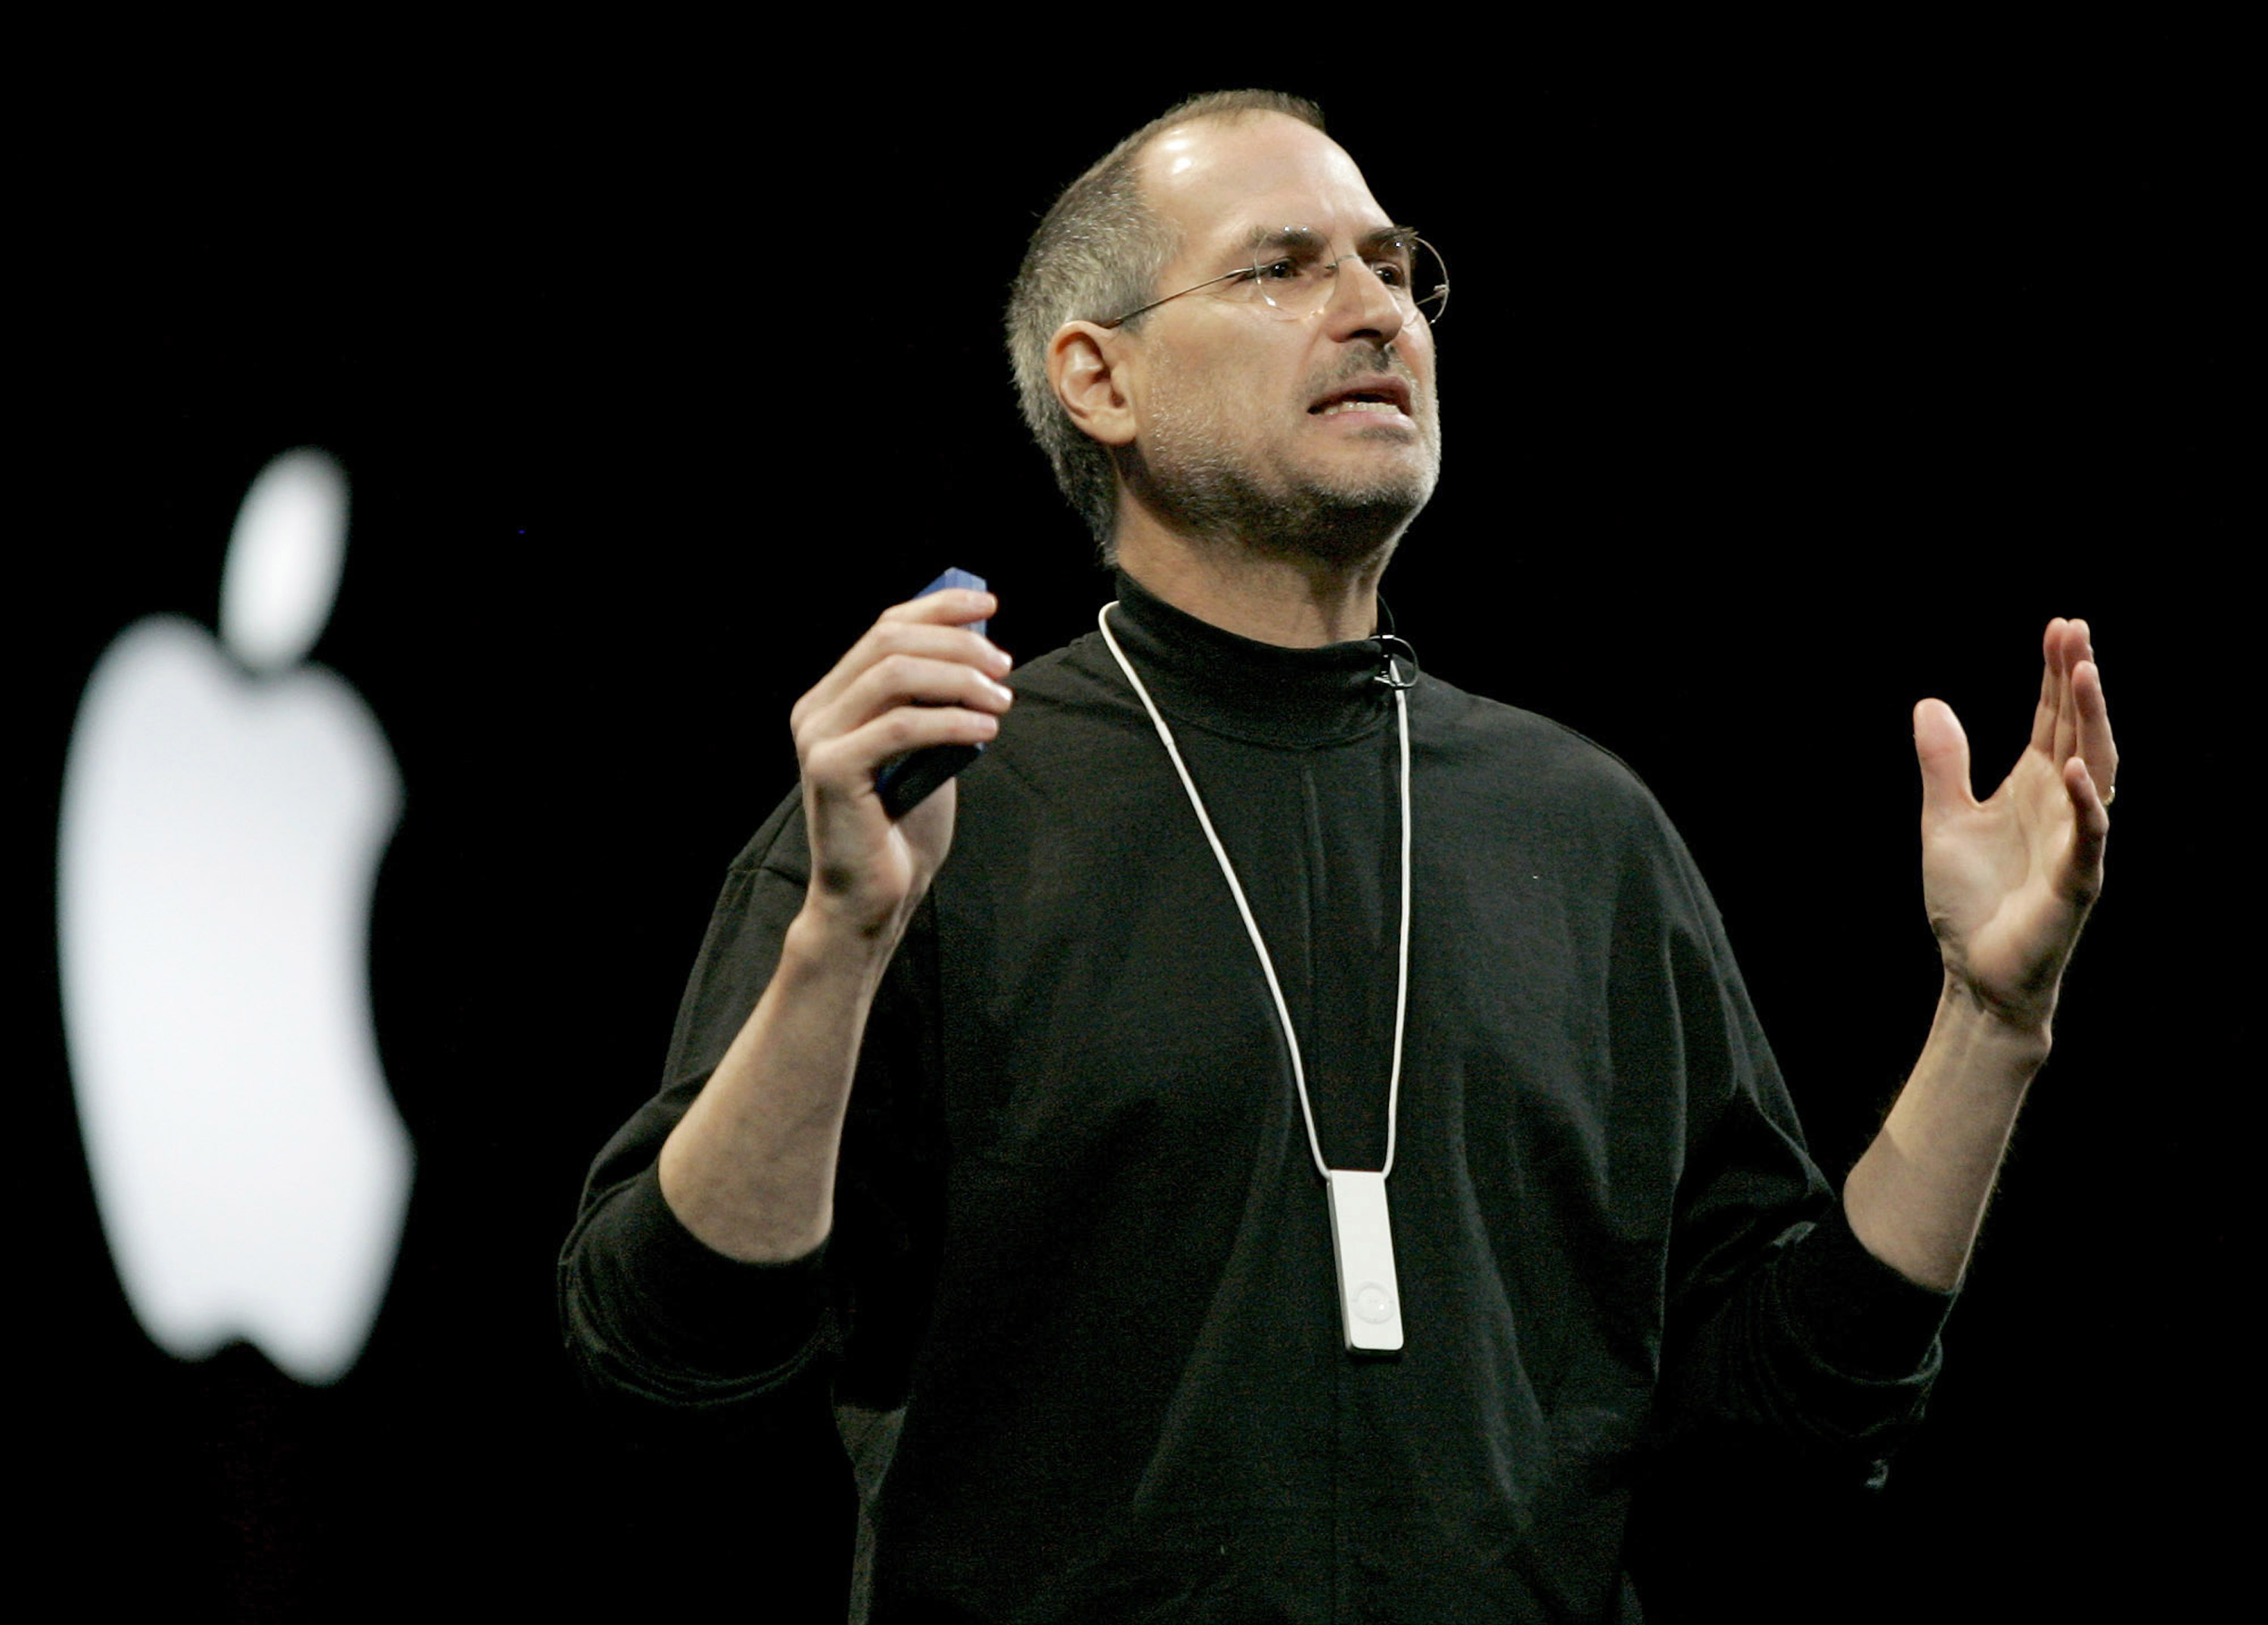 Steve Jobs' Biographer Walter Isaacson Warns: Apple Will Be the Company 'Most Hurt' if US-China Economic Tensions Escalate